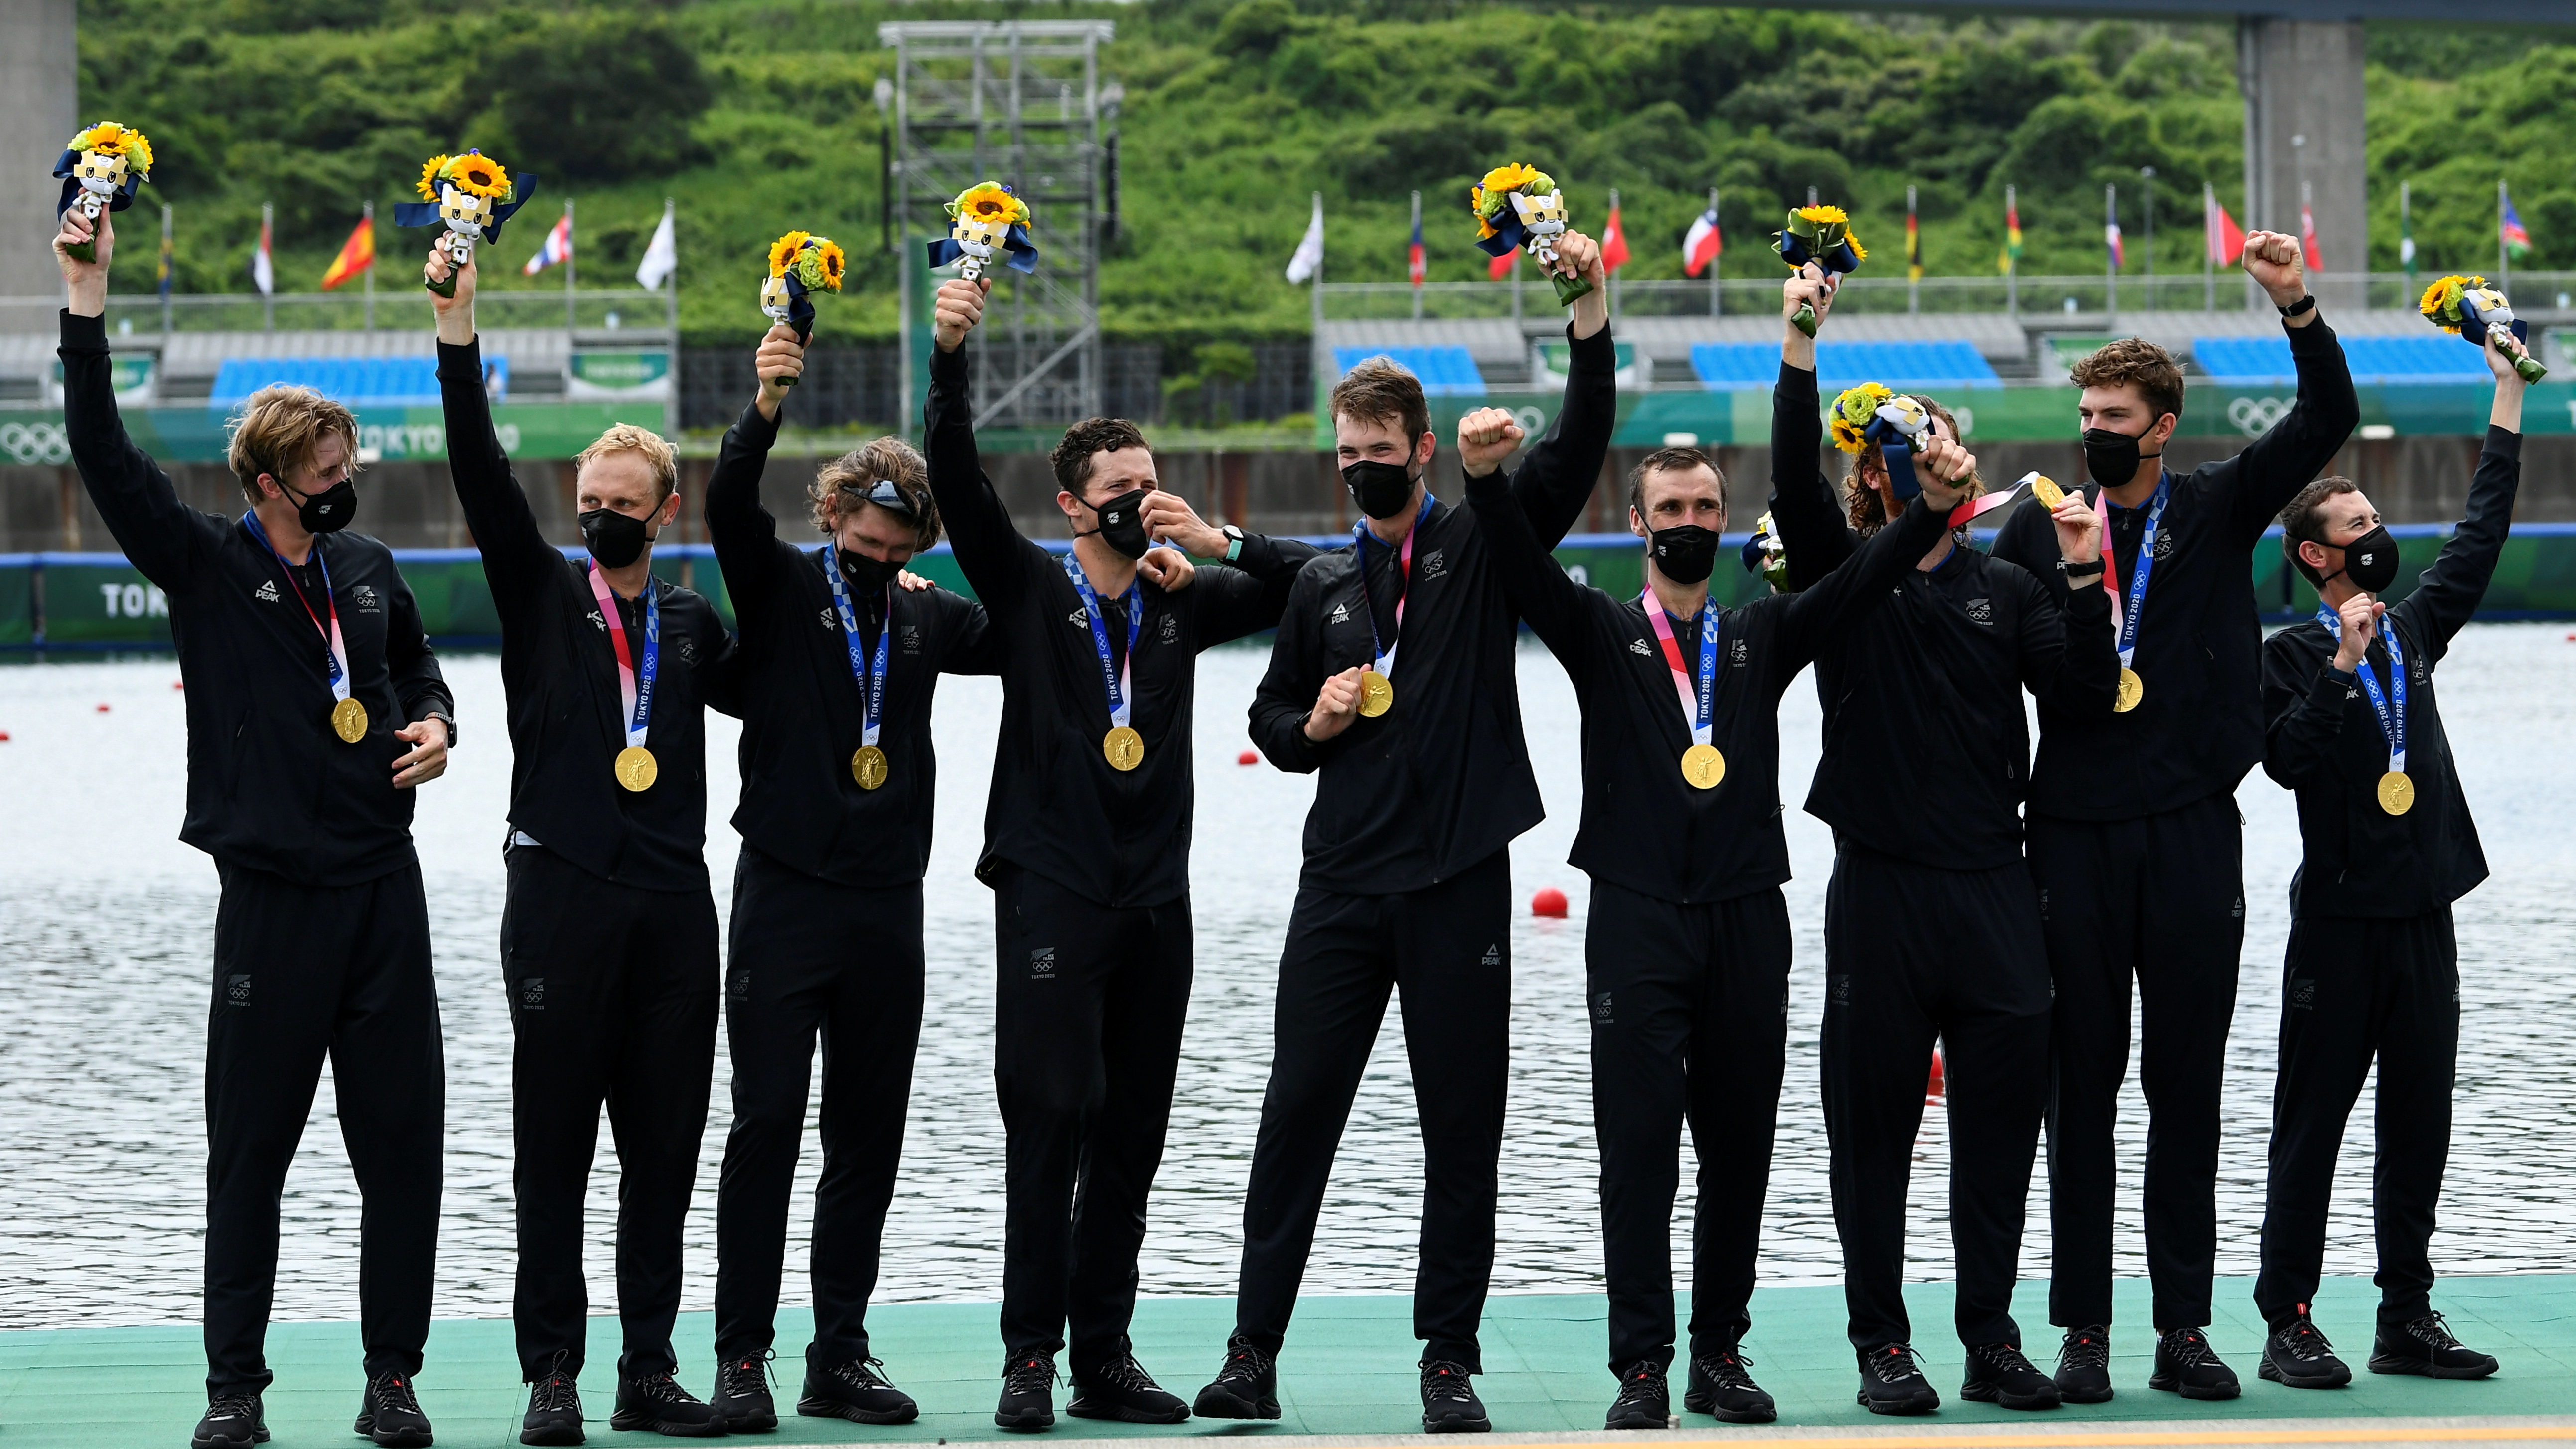 Rowing - Men's Eight - Medal Ceremony